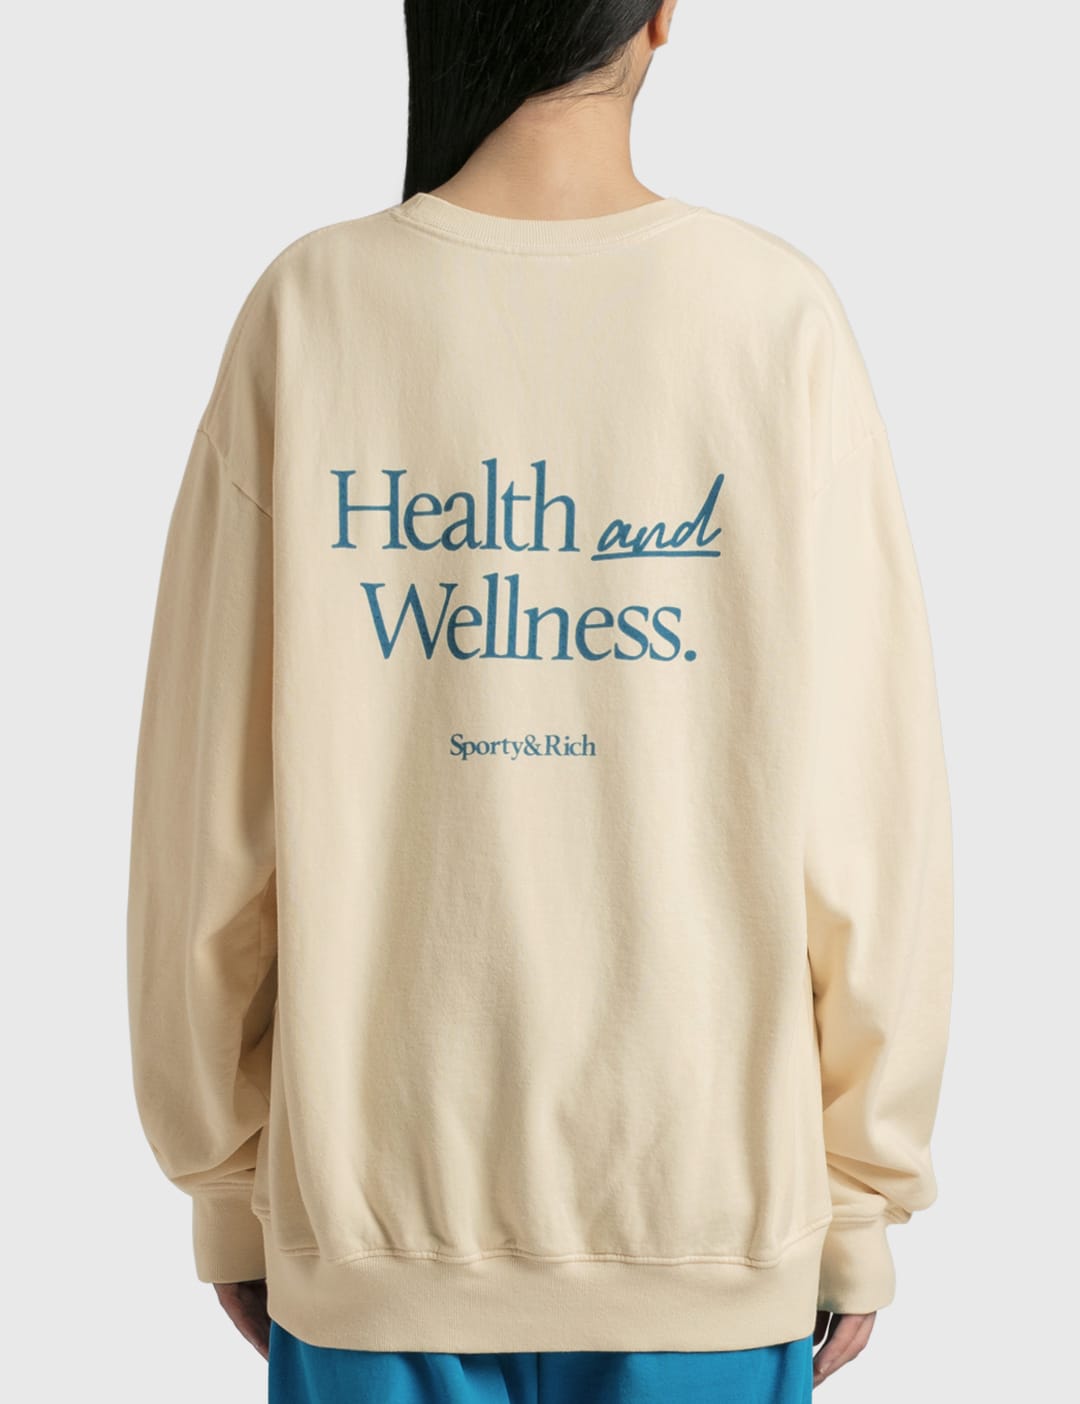 Sporty & Rich - New Health Crewneck | HBX - Globally Curated